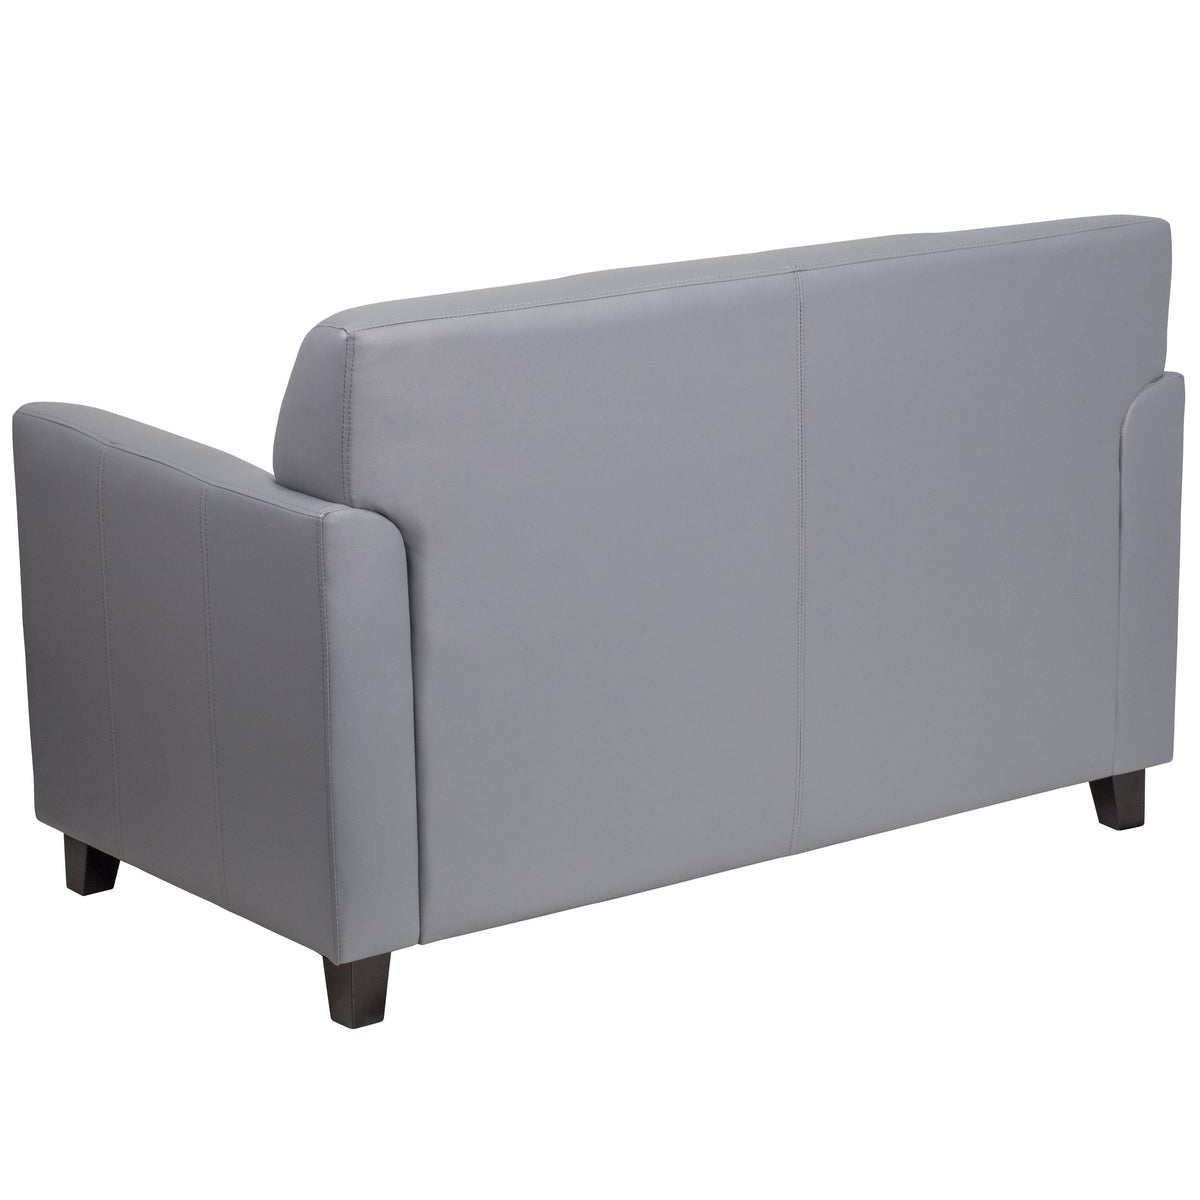 Gray |#| Gray LeatherSoft Loveseat with Clean Line Stitched Frame - Reception Seating